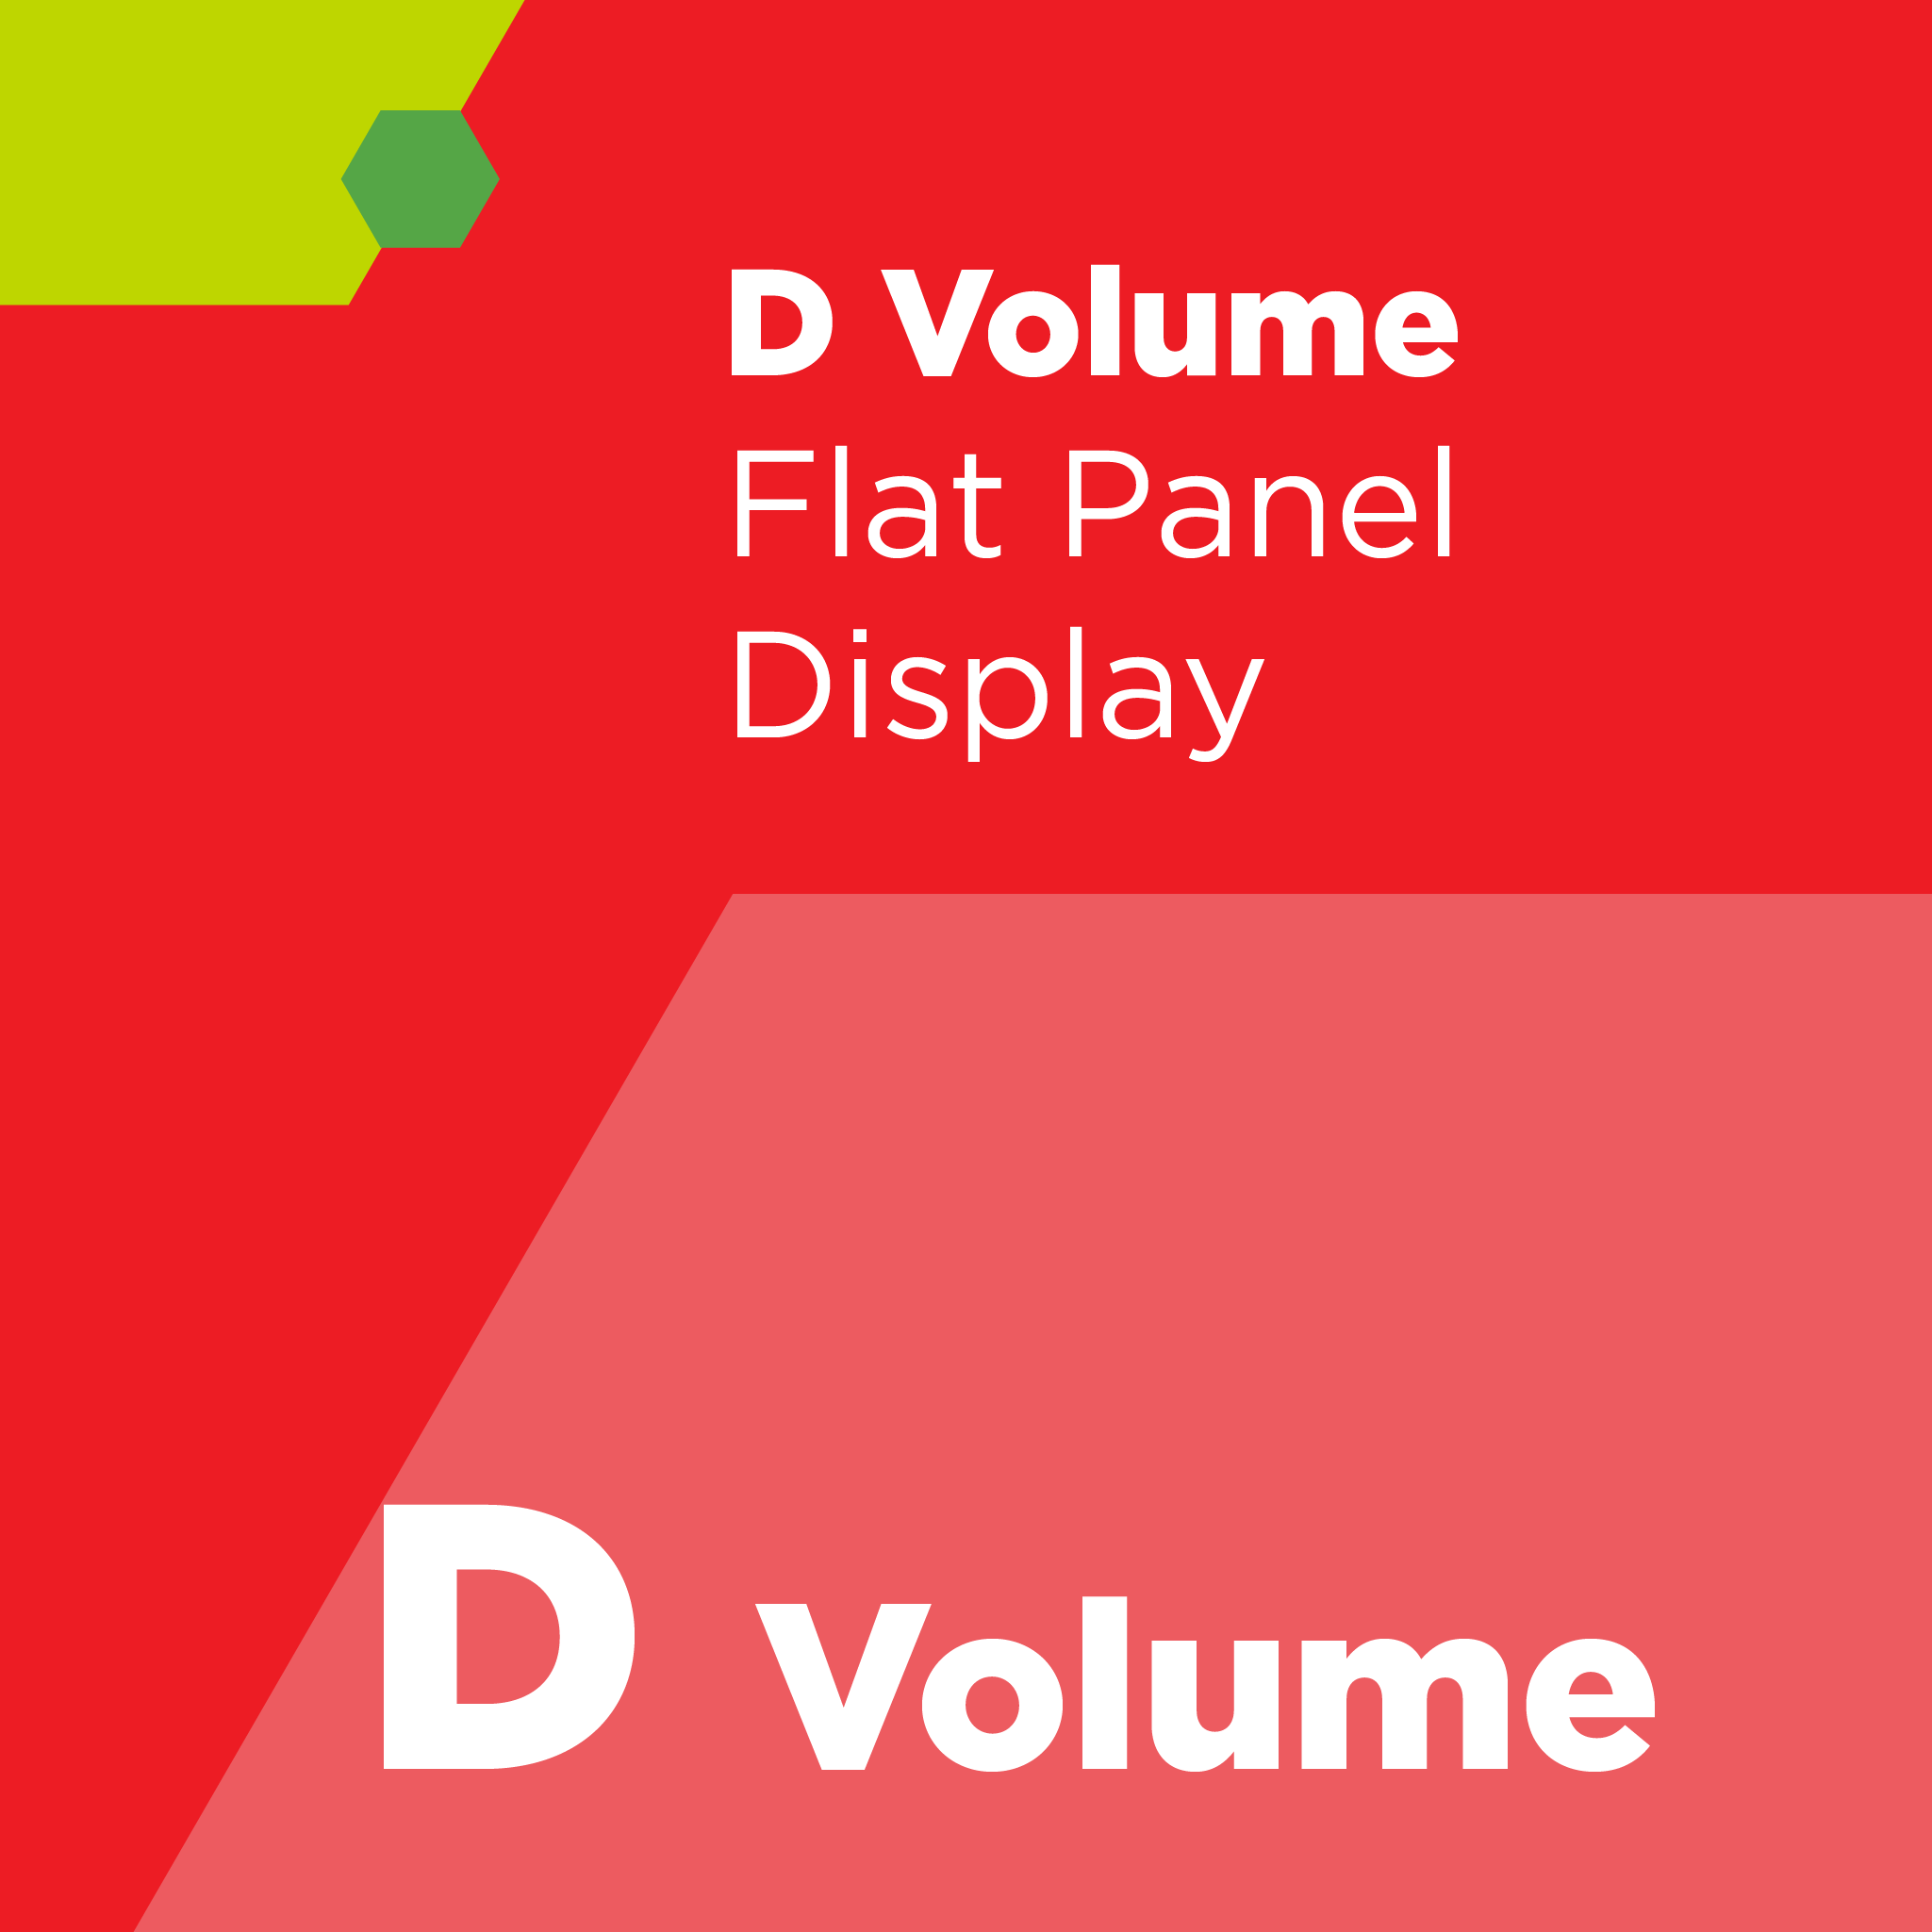 D02900 - SEMI D29 - Test Method for Heat Resistance in Flat Panel Display (FPD) Color Filters